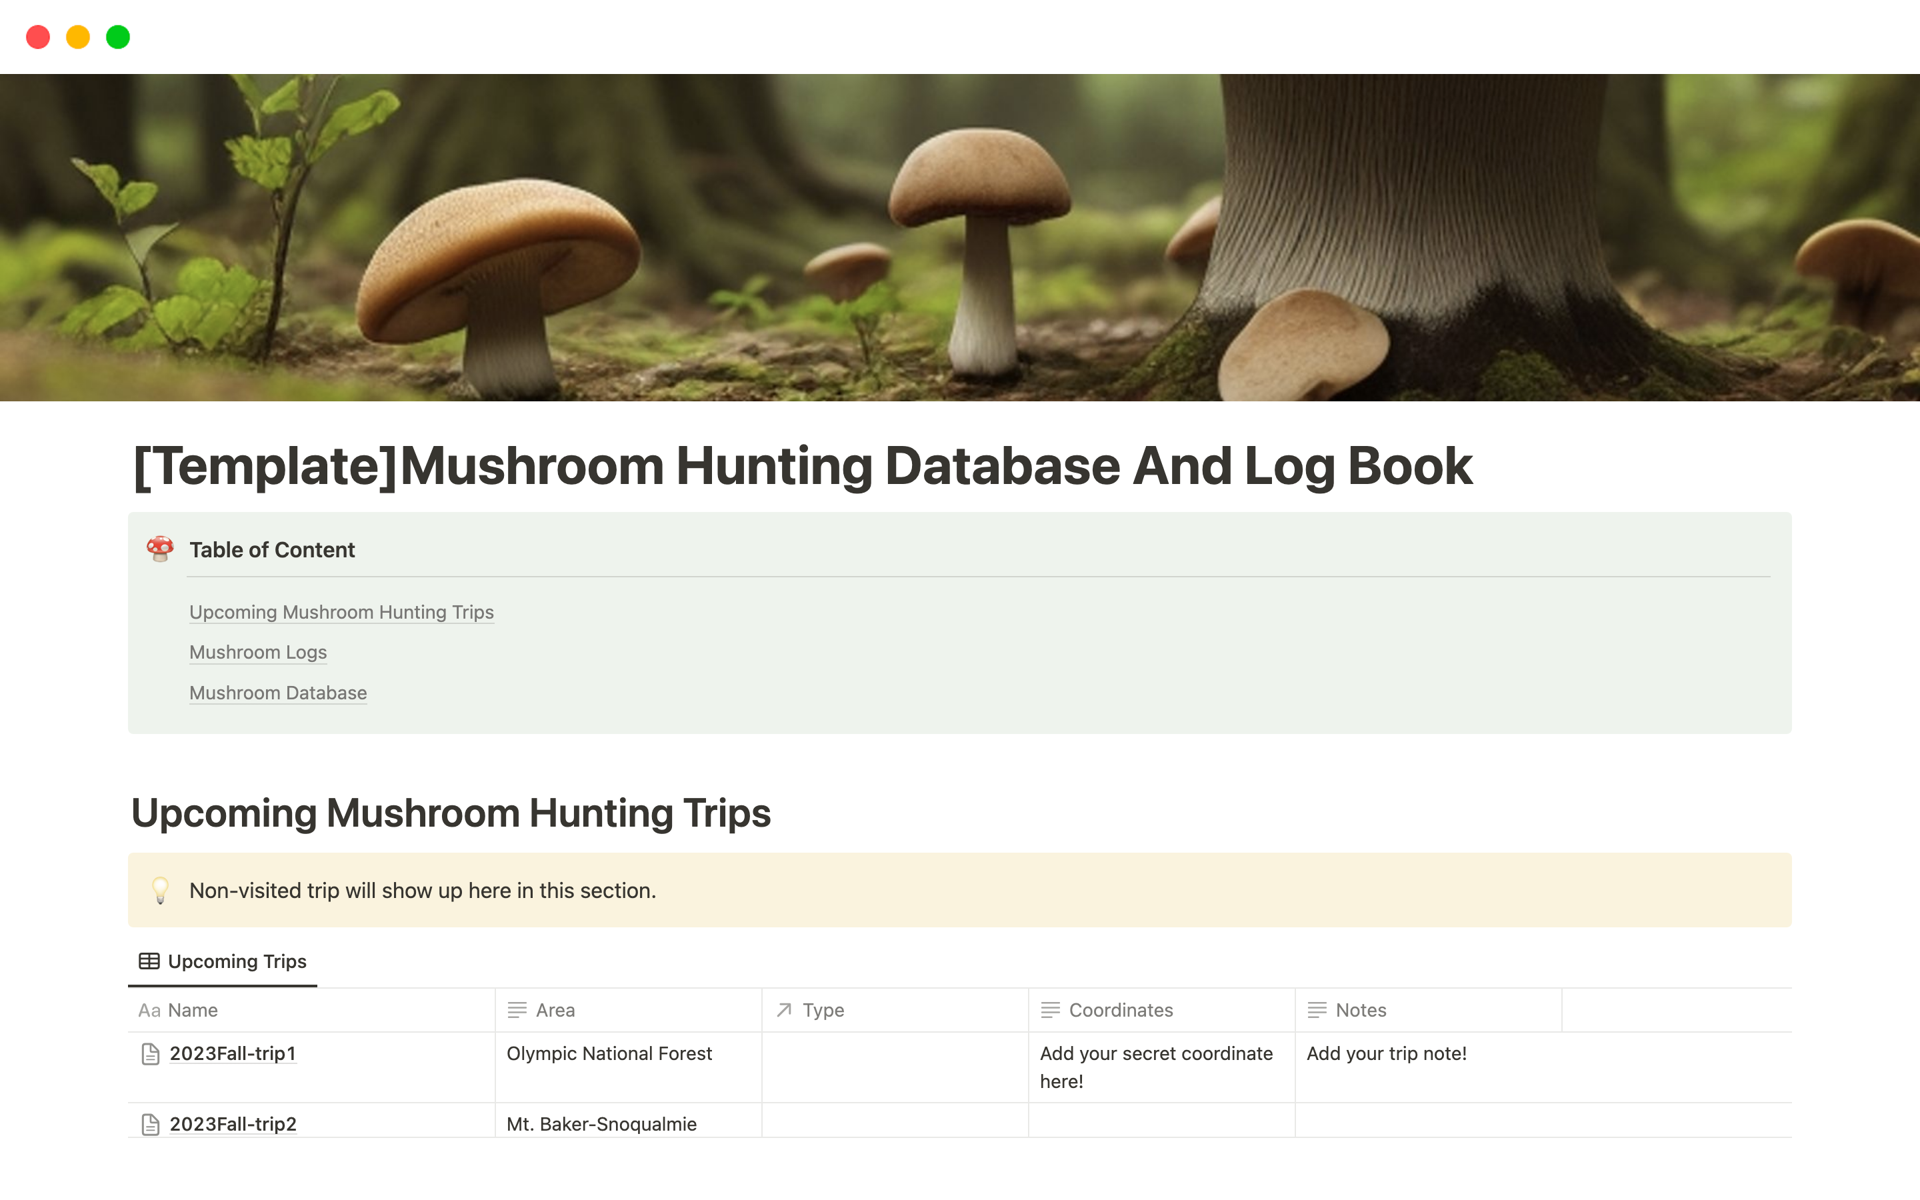 Designed for simplicity and efficiency, this Mushroom Hunting Database and Log Book is your go-to tool for organizing and documenting every fungi find.